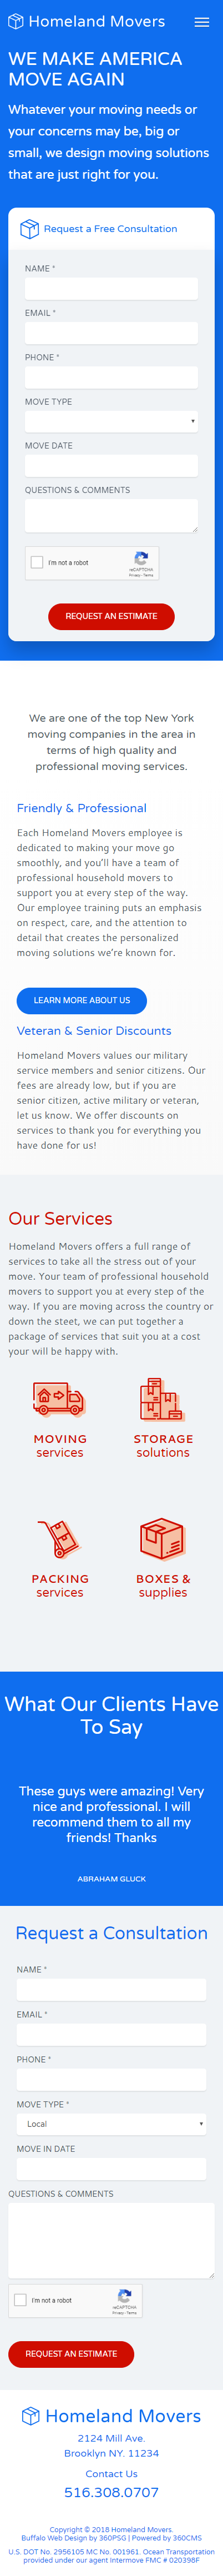 Homeland Movers Mobile